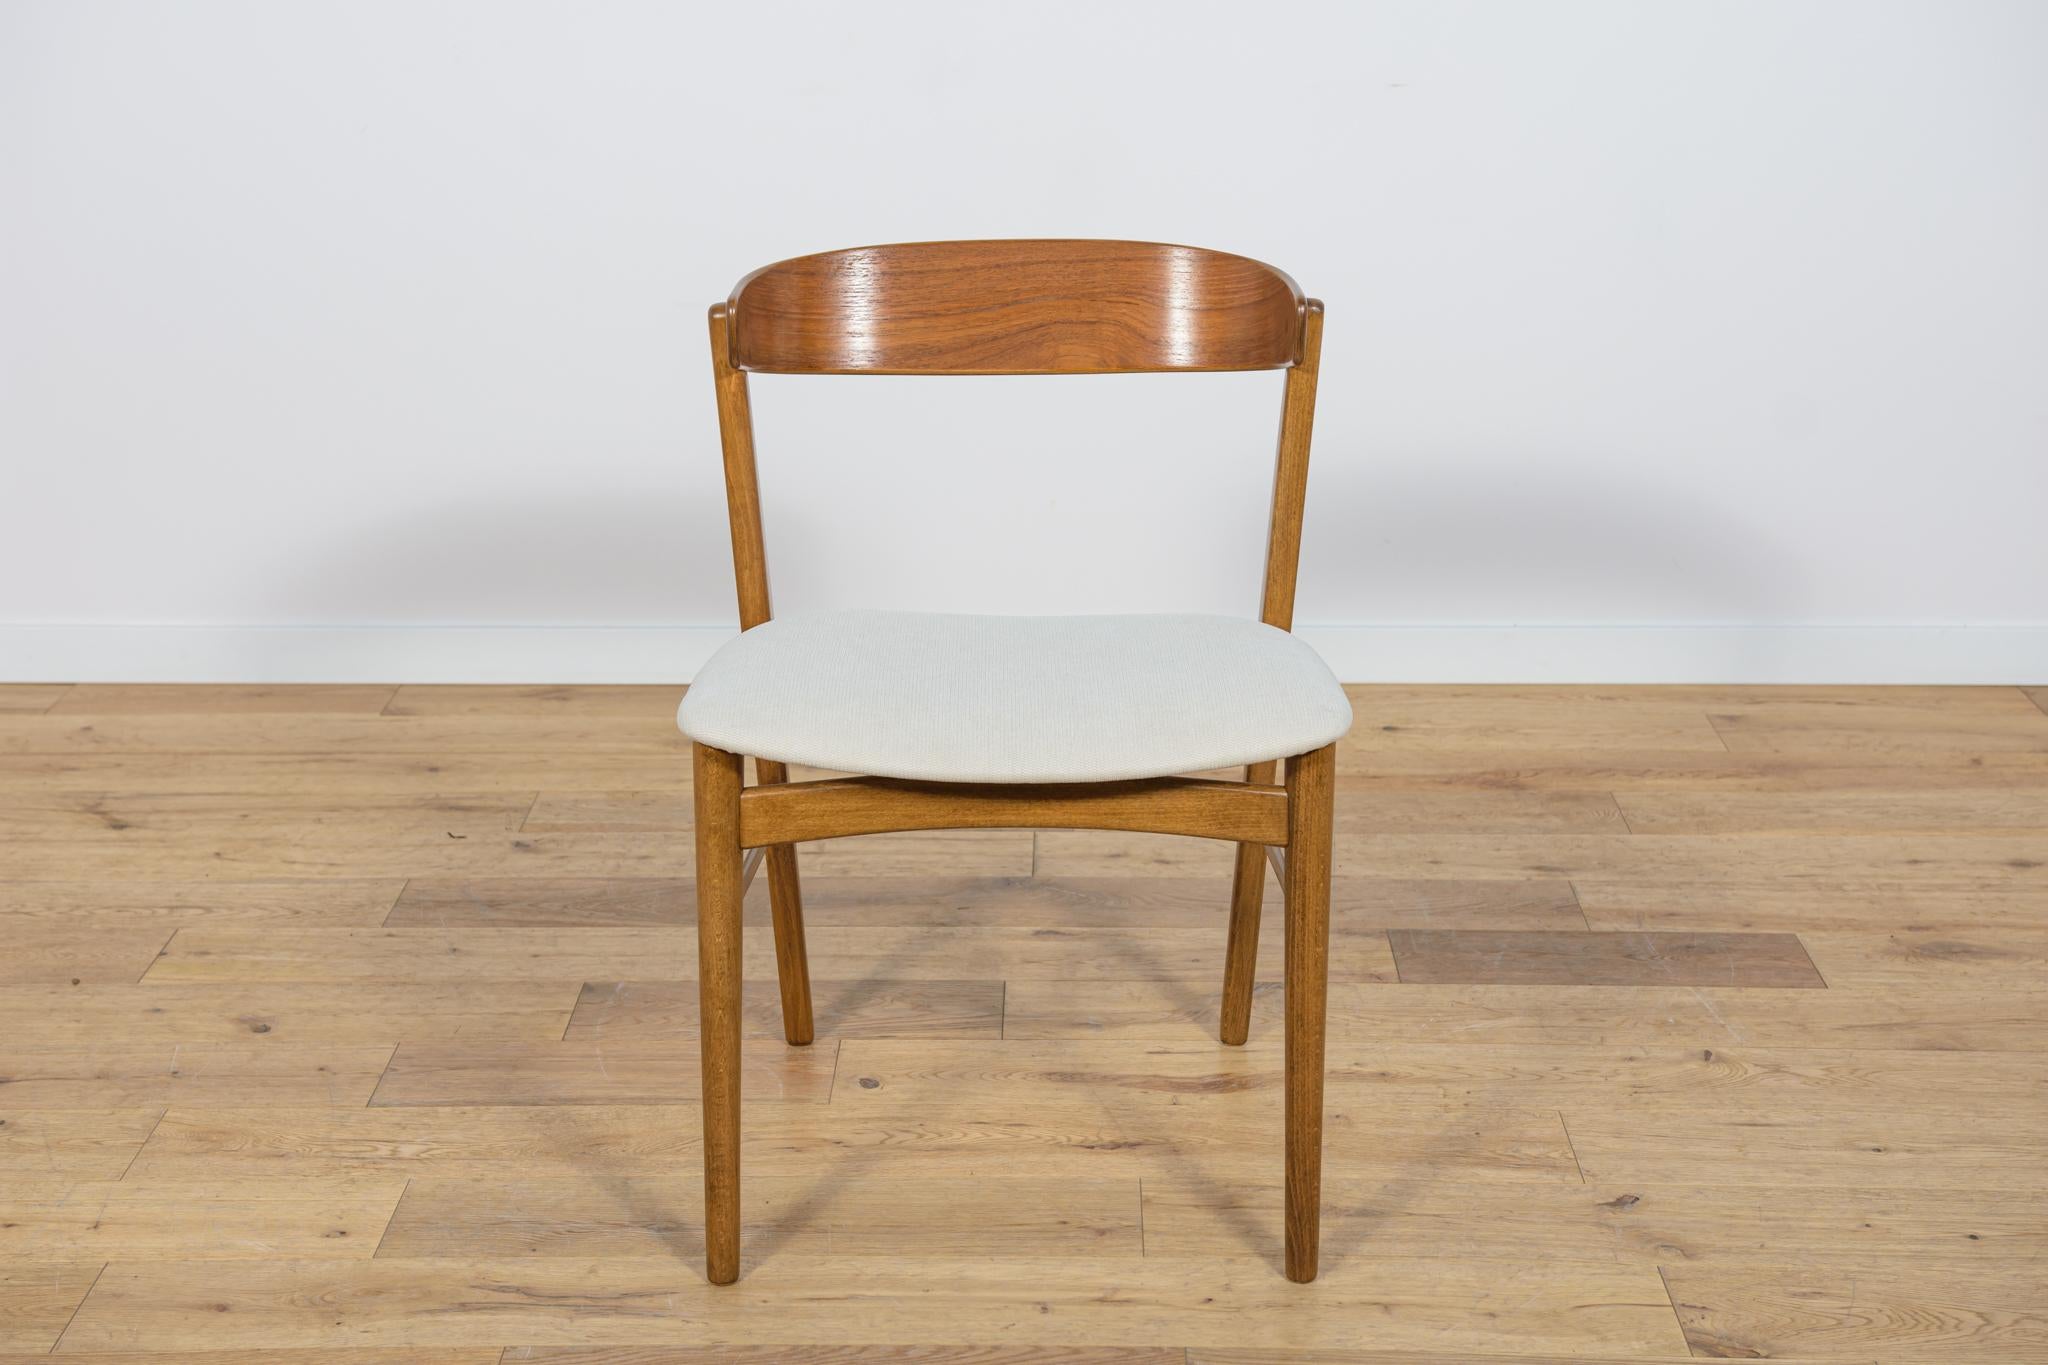 Mid-20th Century Mid-Century Model 206 Dining Chairs from Farstrup Furniture, 1960s, Denmark. For Sale